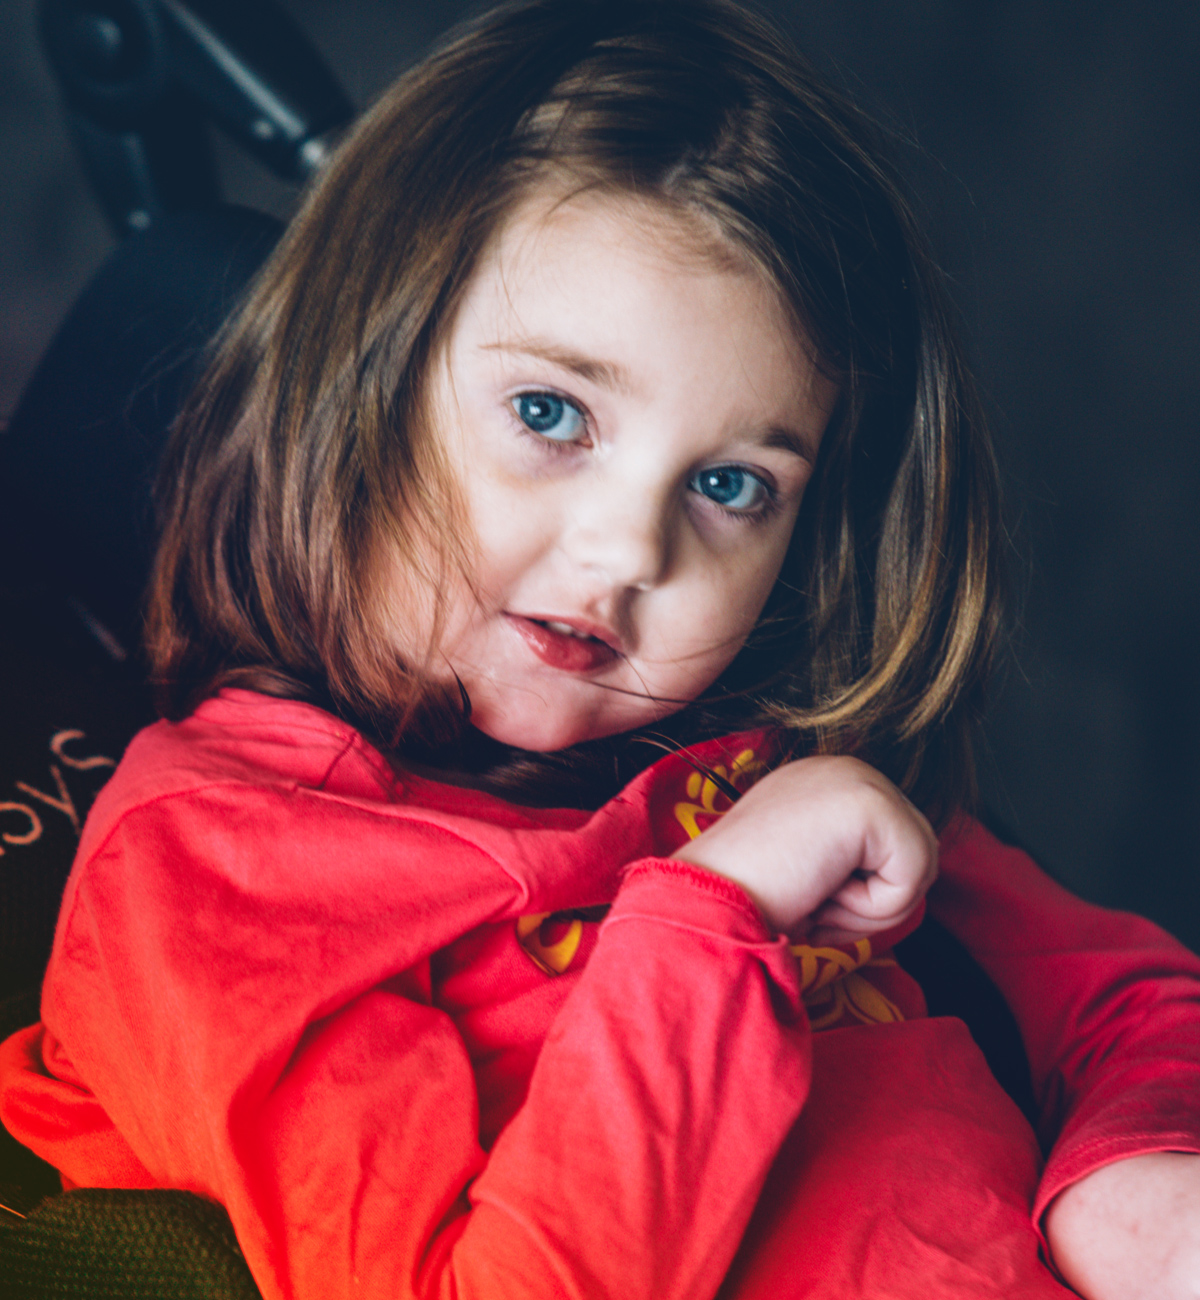 About Rett Syndrome